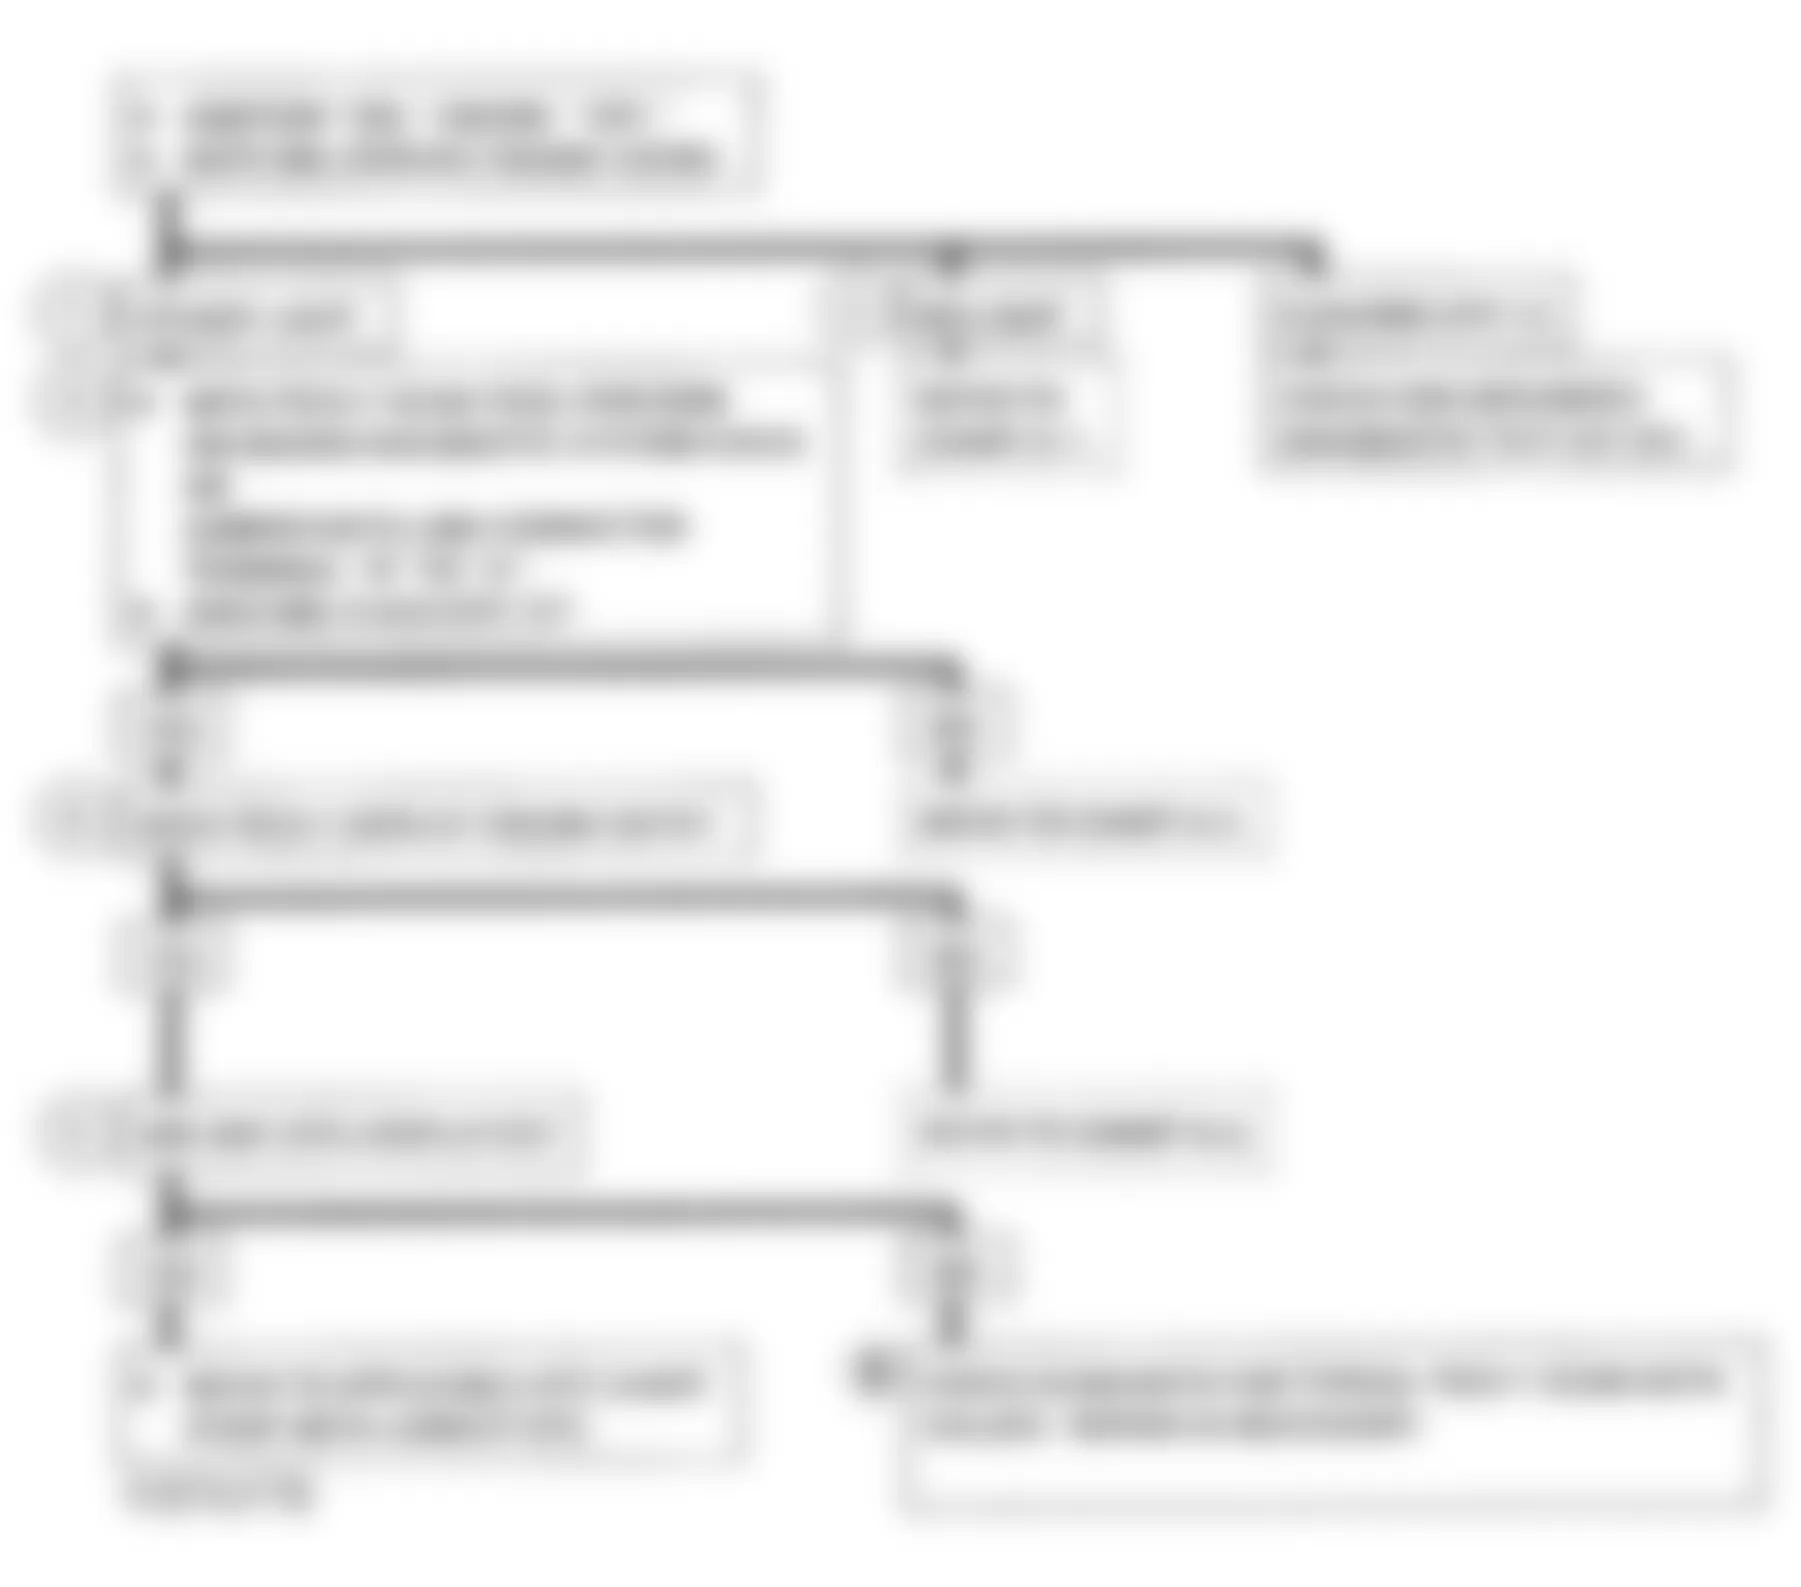 GMC Suburban K2500 1993 - Component Locations -  Flowchart, System Check A/T